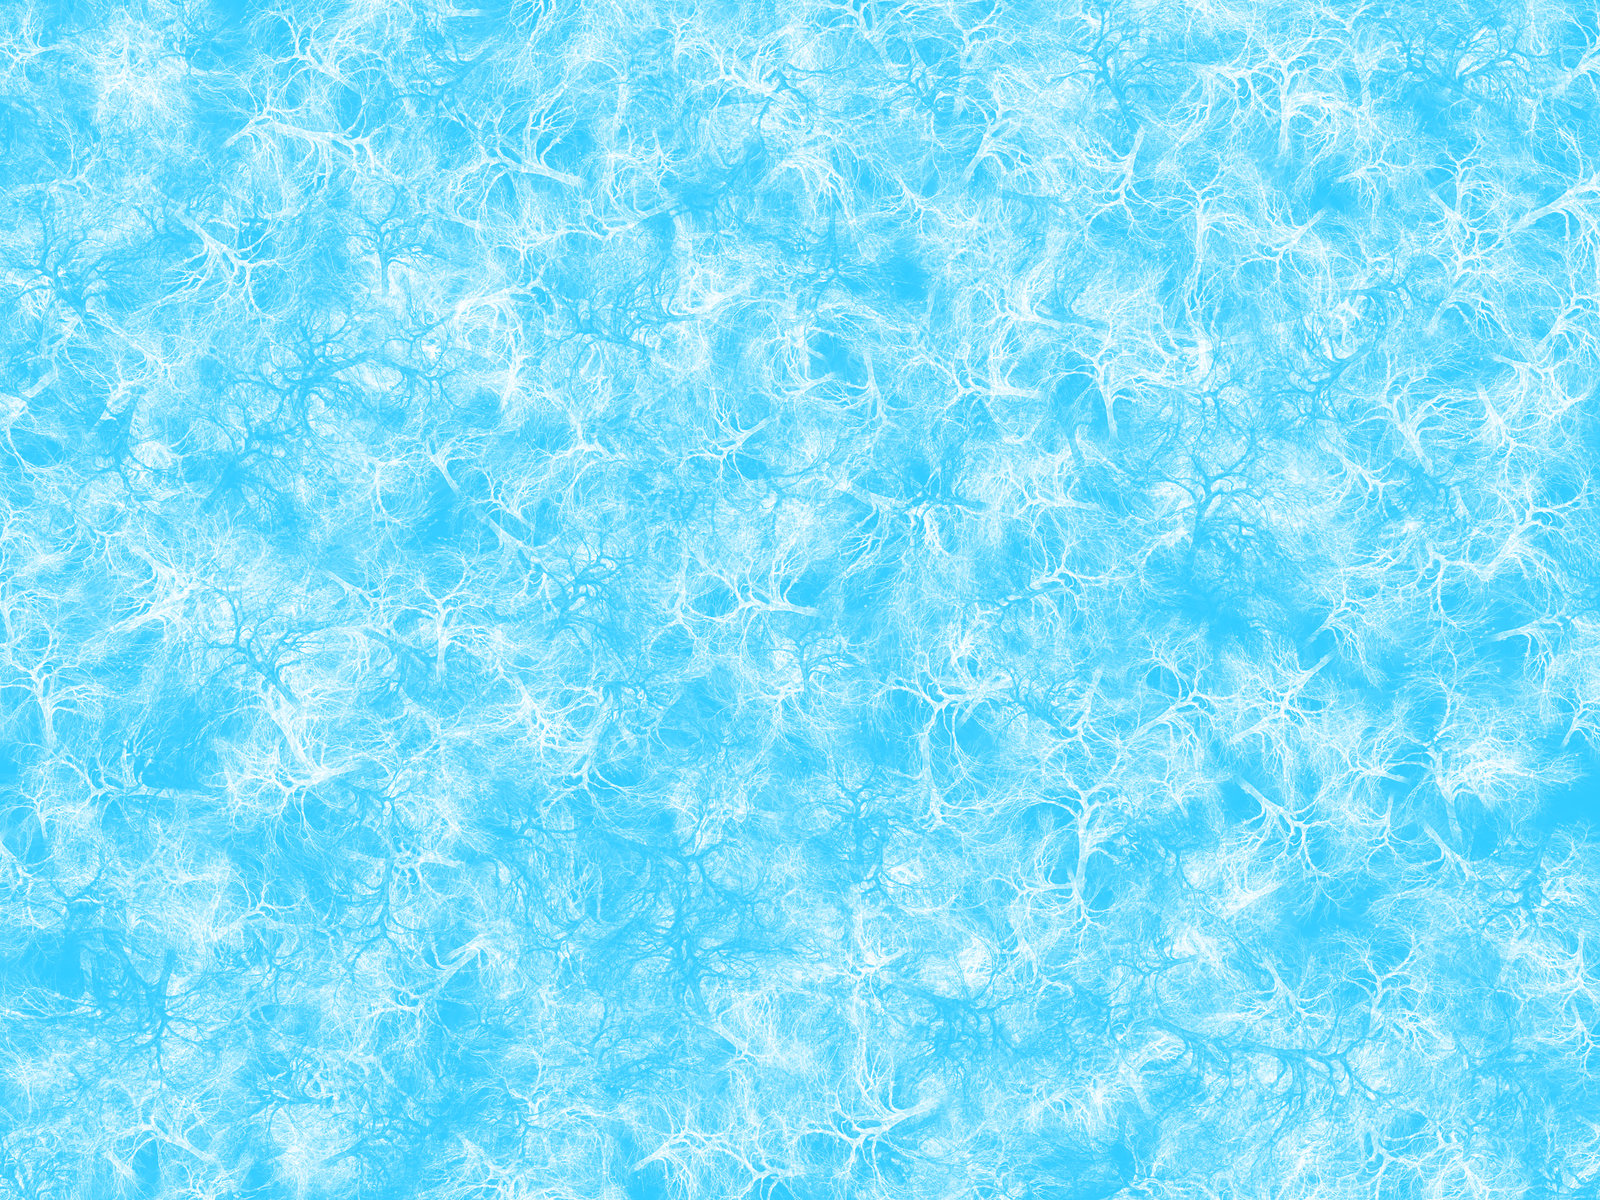 Medium Sky Blue Devious Background By Donnamarie113